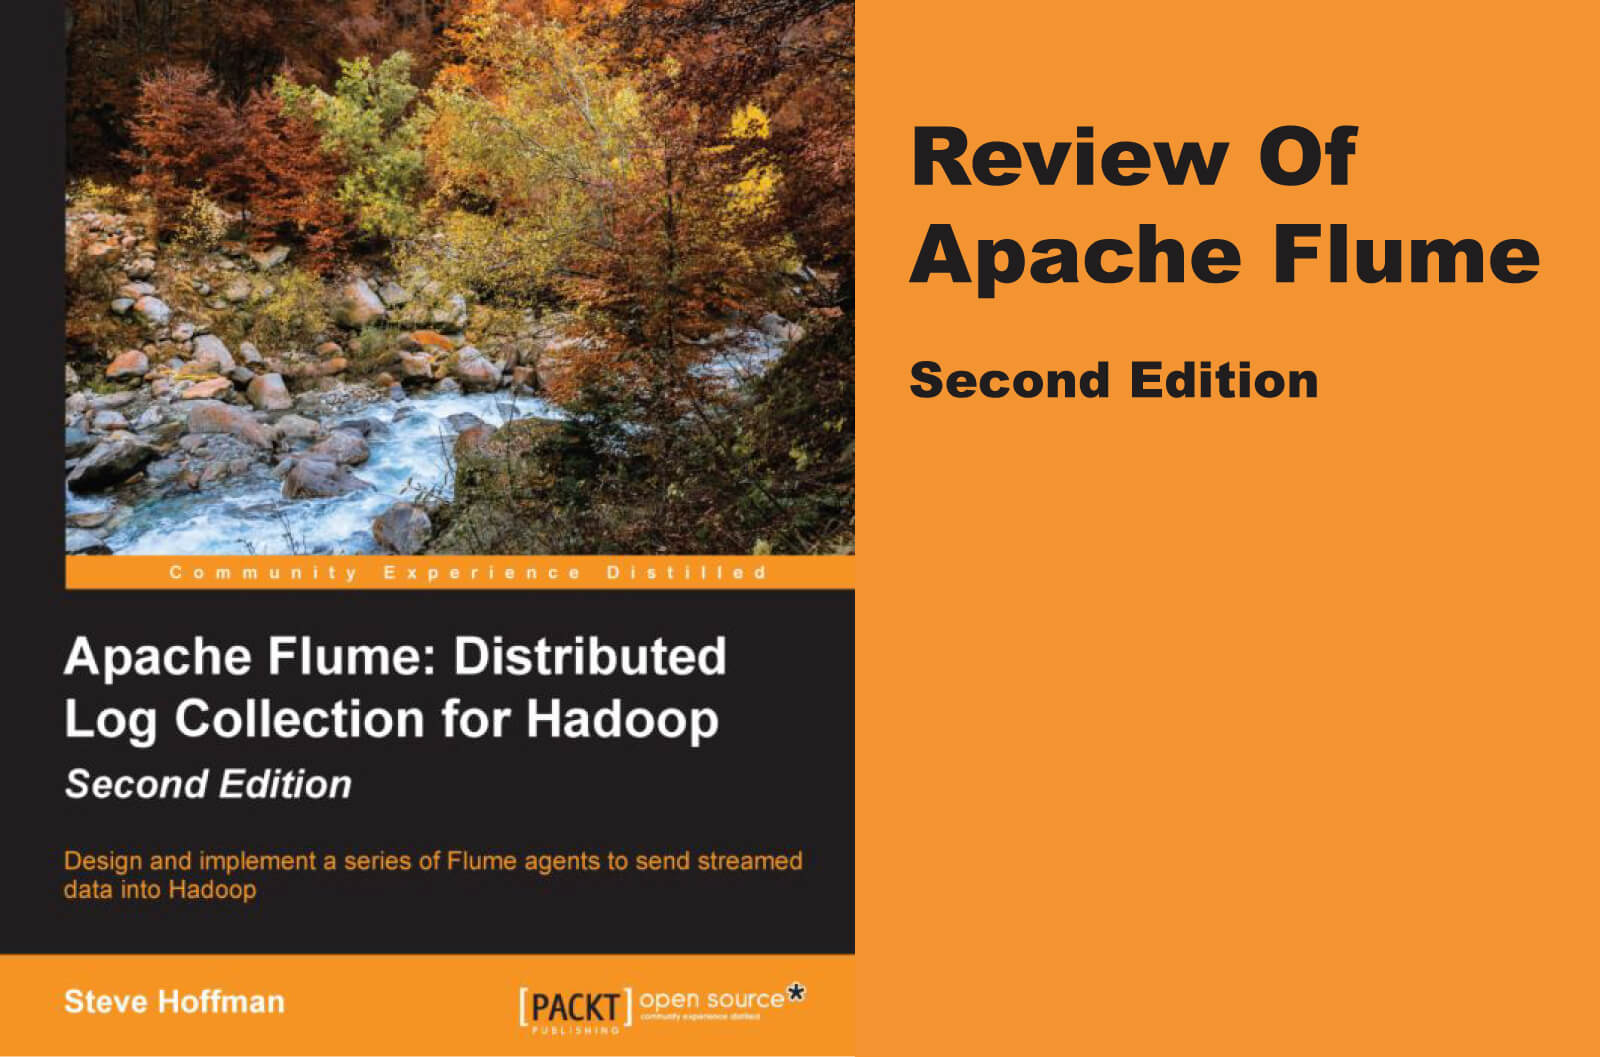 Review of “Apache Flume” second edition by Steve Hoffman